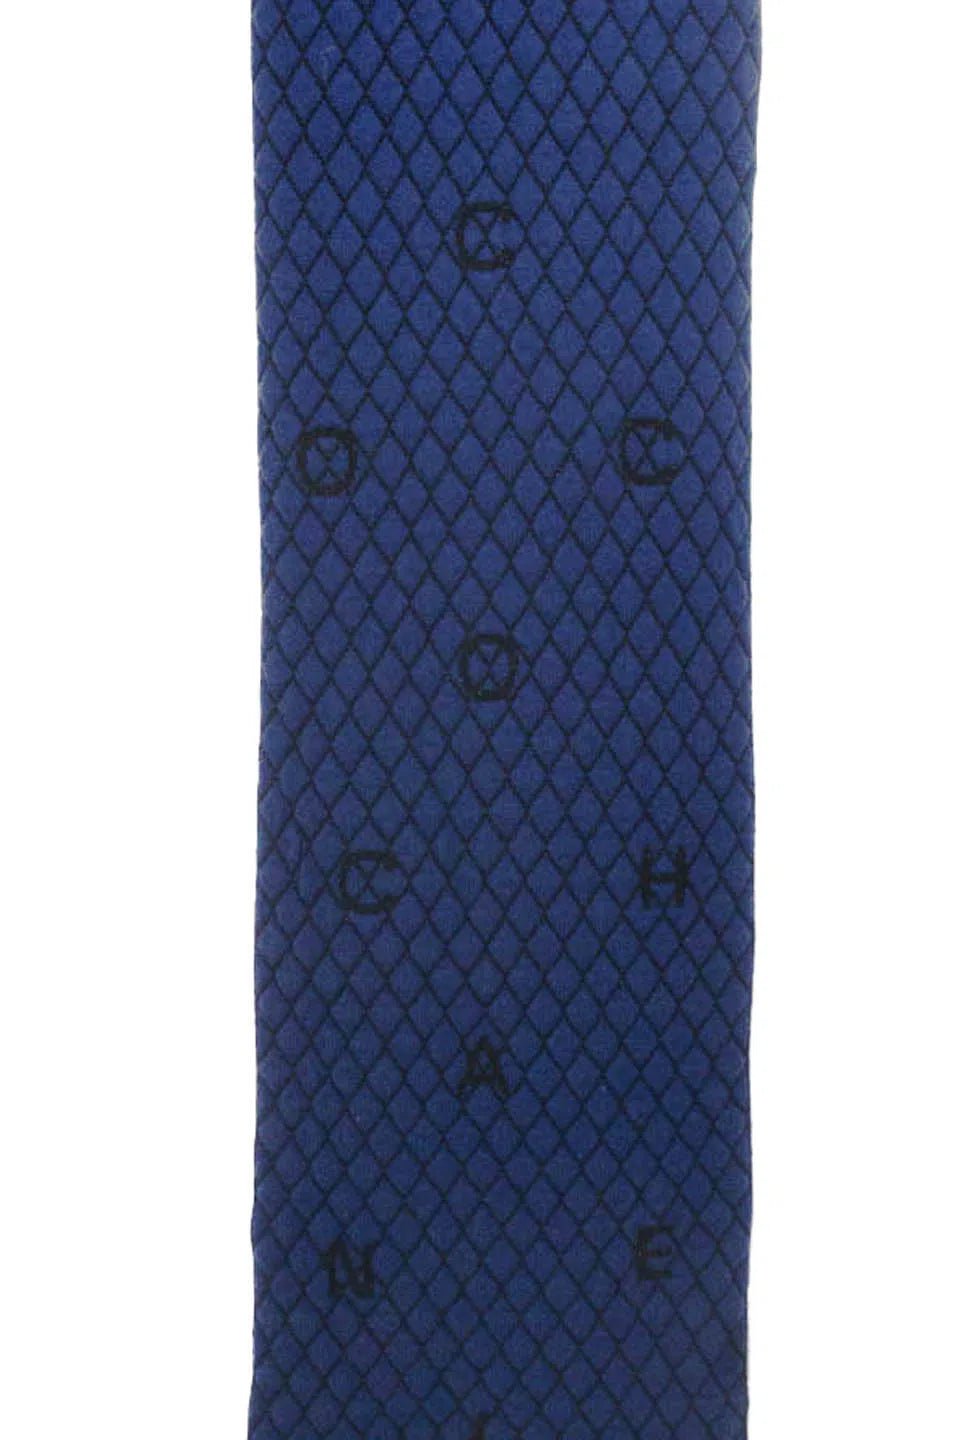 Chanel Quilted Design C H A N E L Letters Oblong Cashmere Scarf - Navy